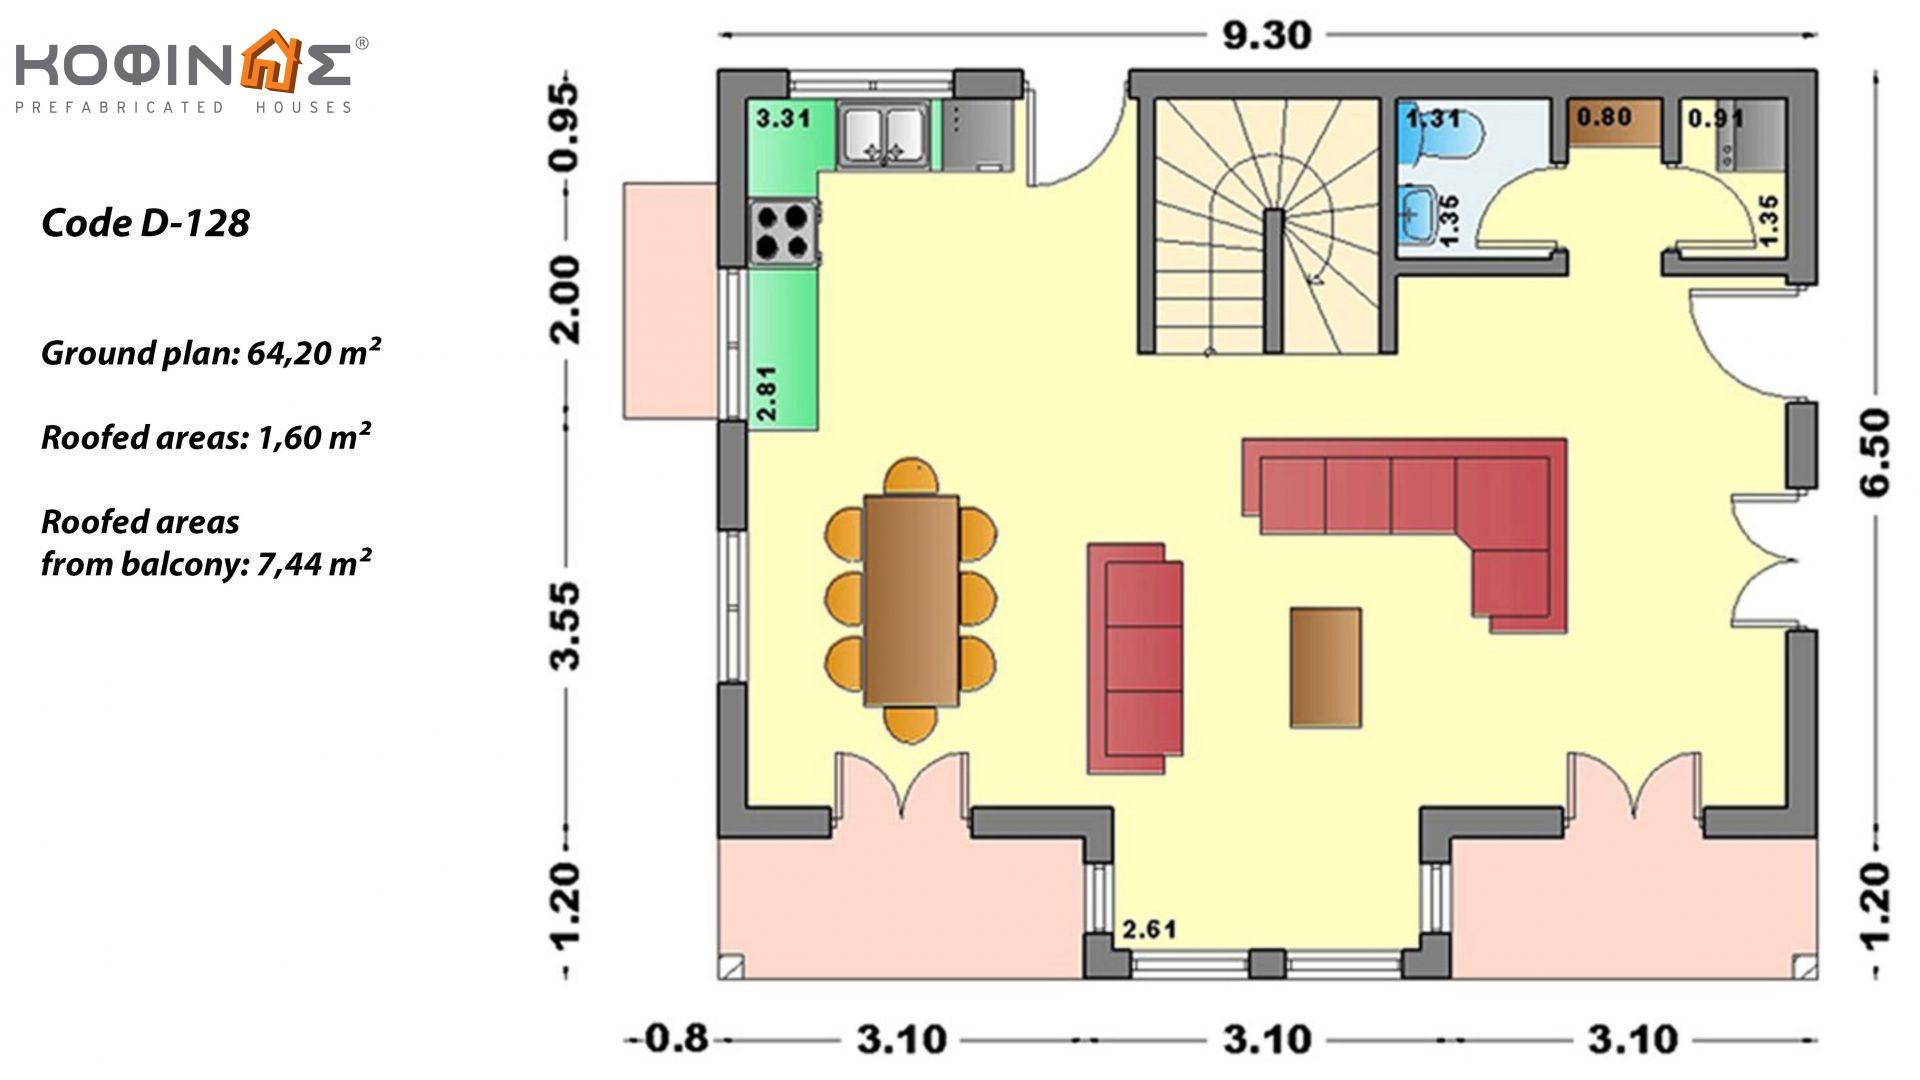 2-story house D-128, total surface of 128,40 m²,covered roofed areas 16.48 m²,balconies 7.44 m²